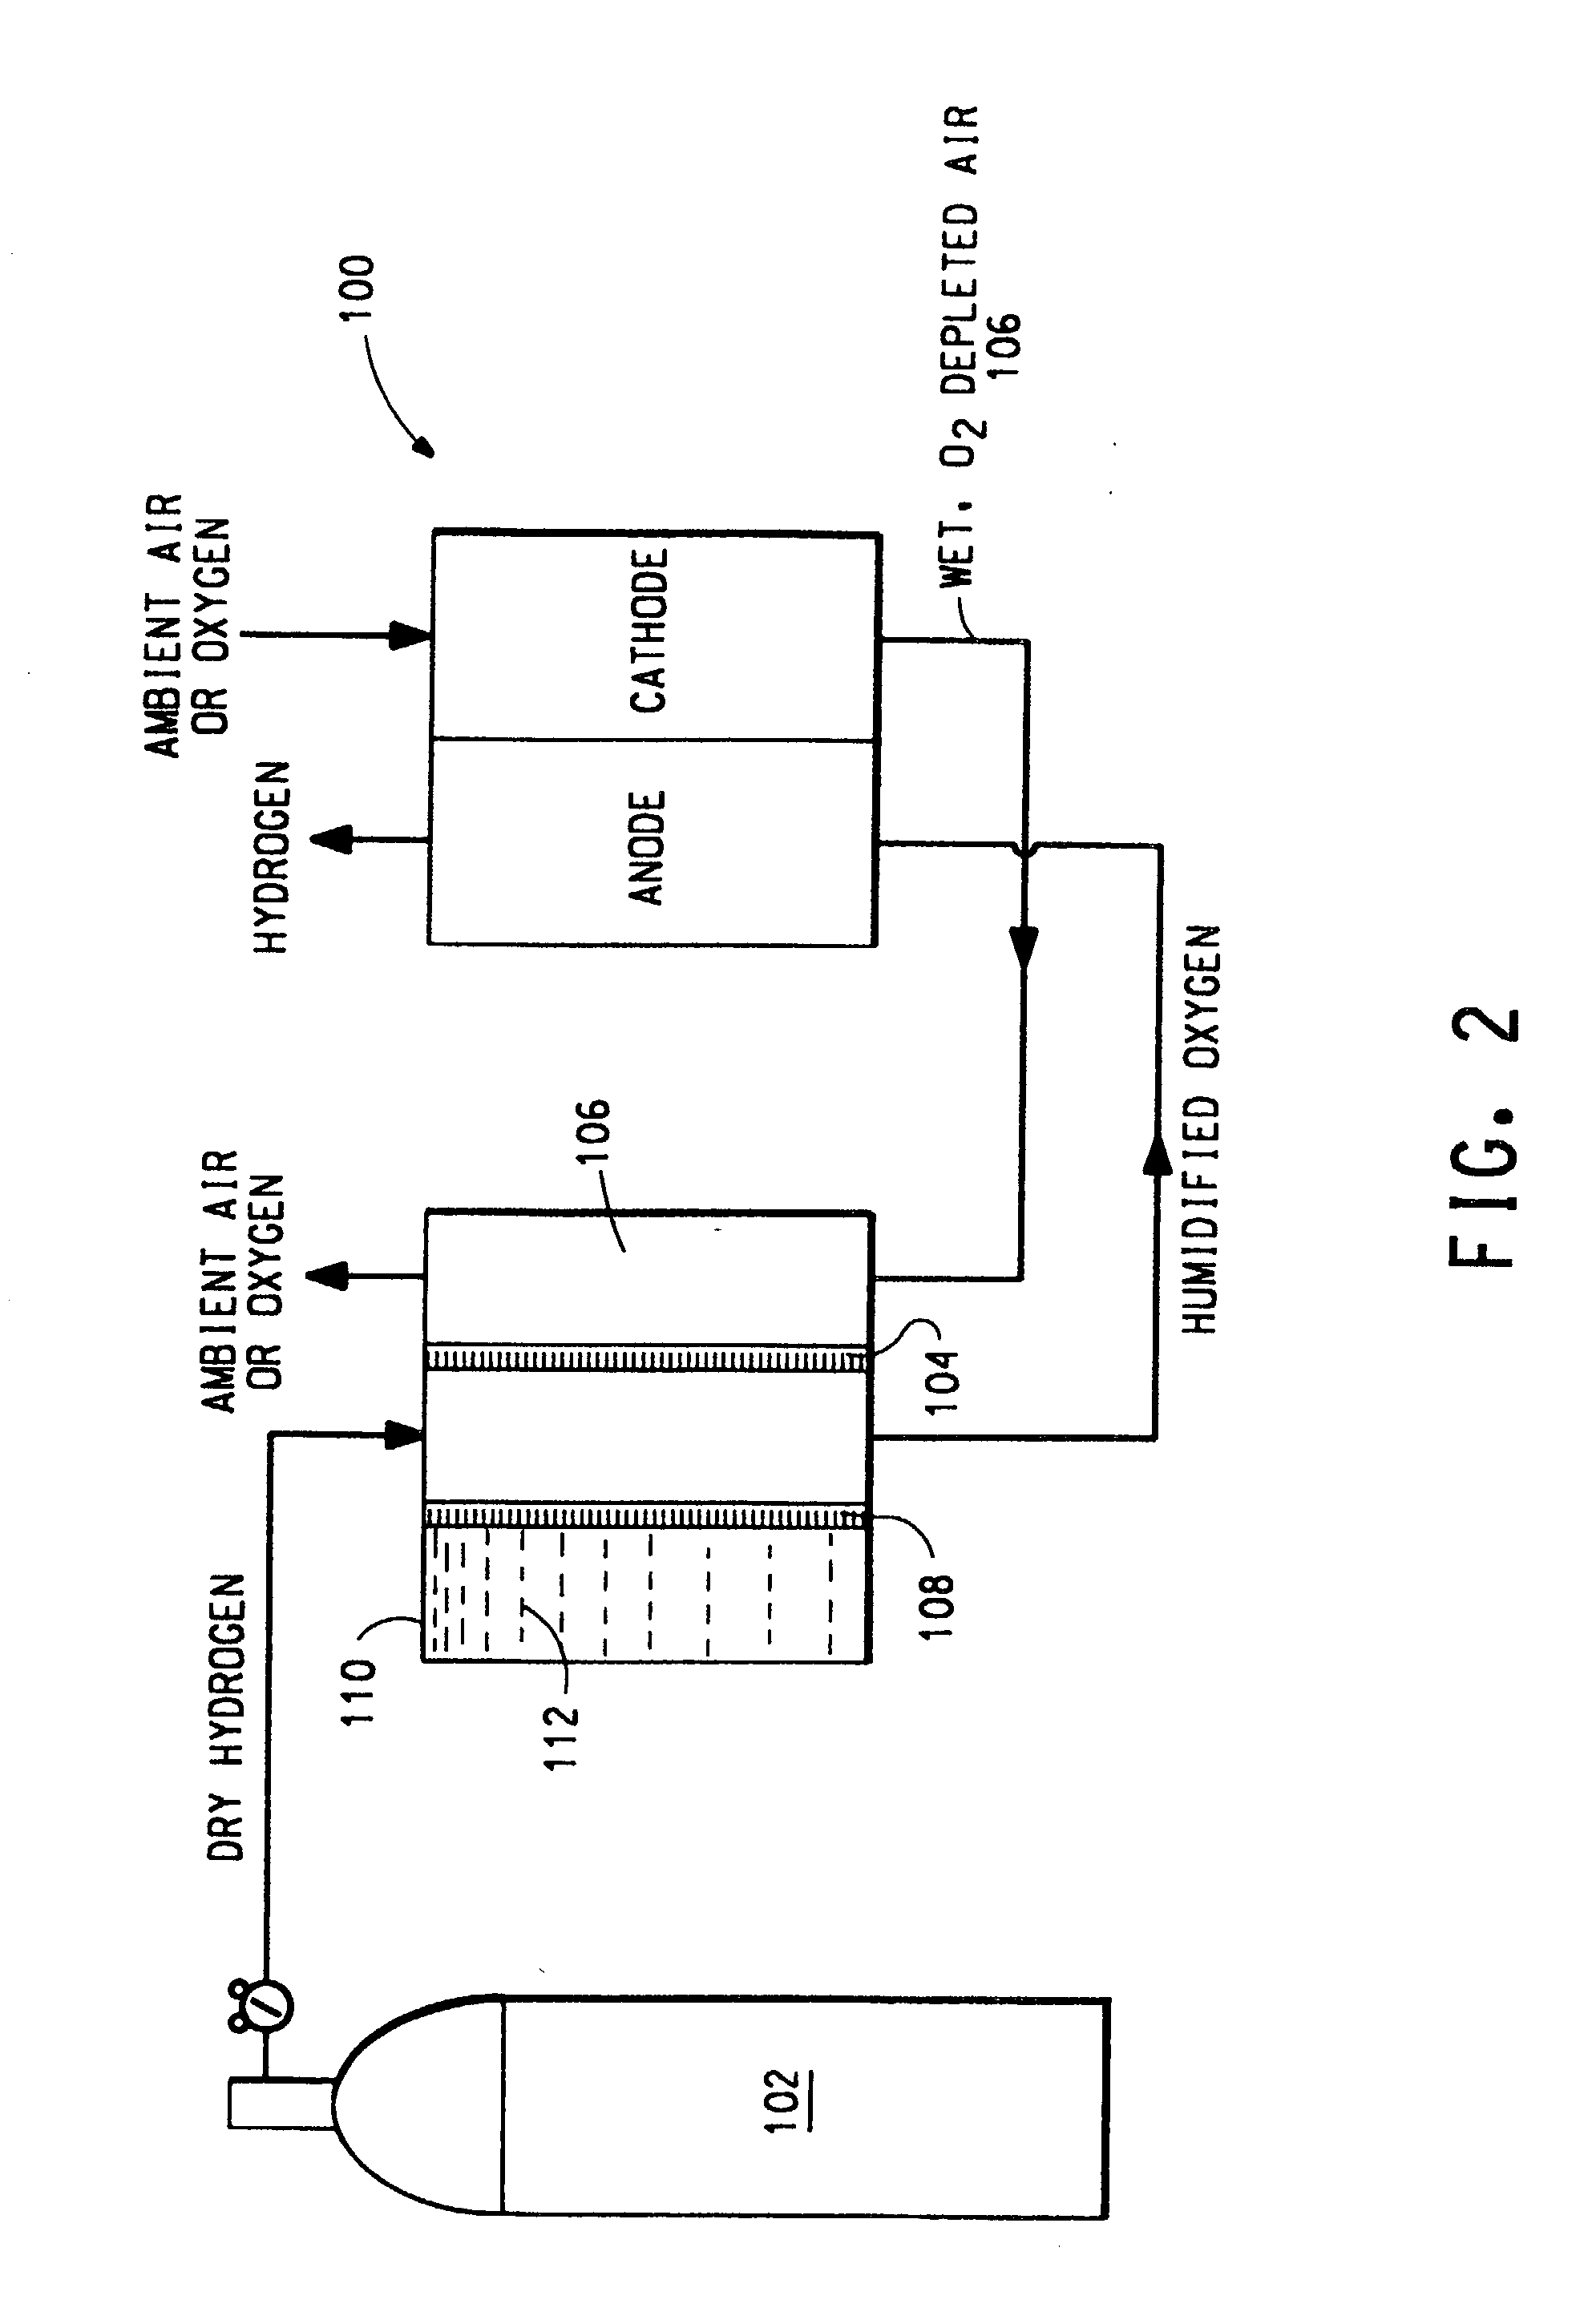 Humidifying gas induction or supply system